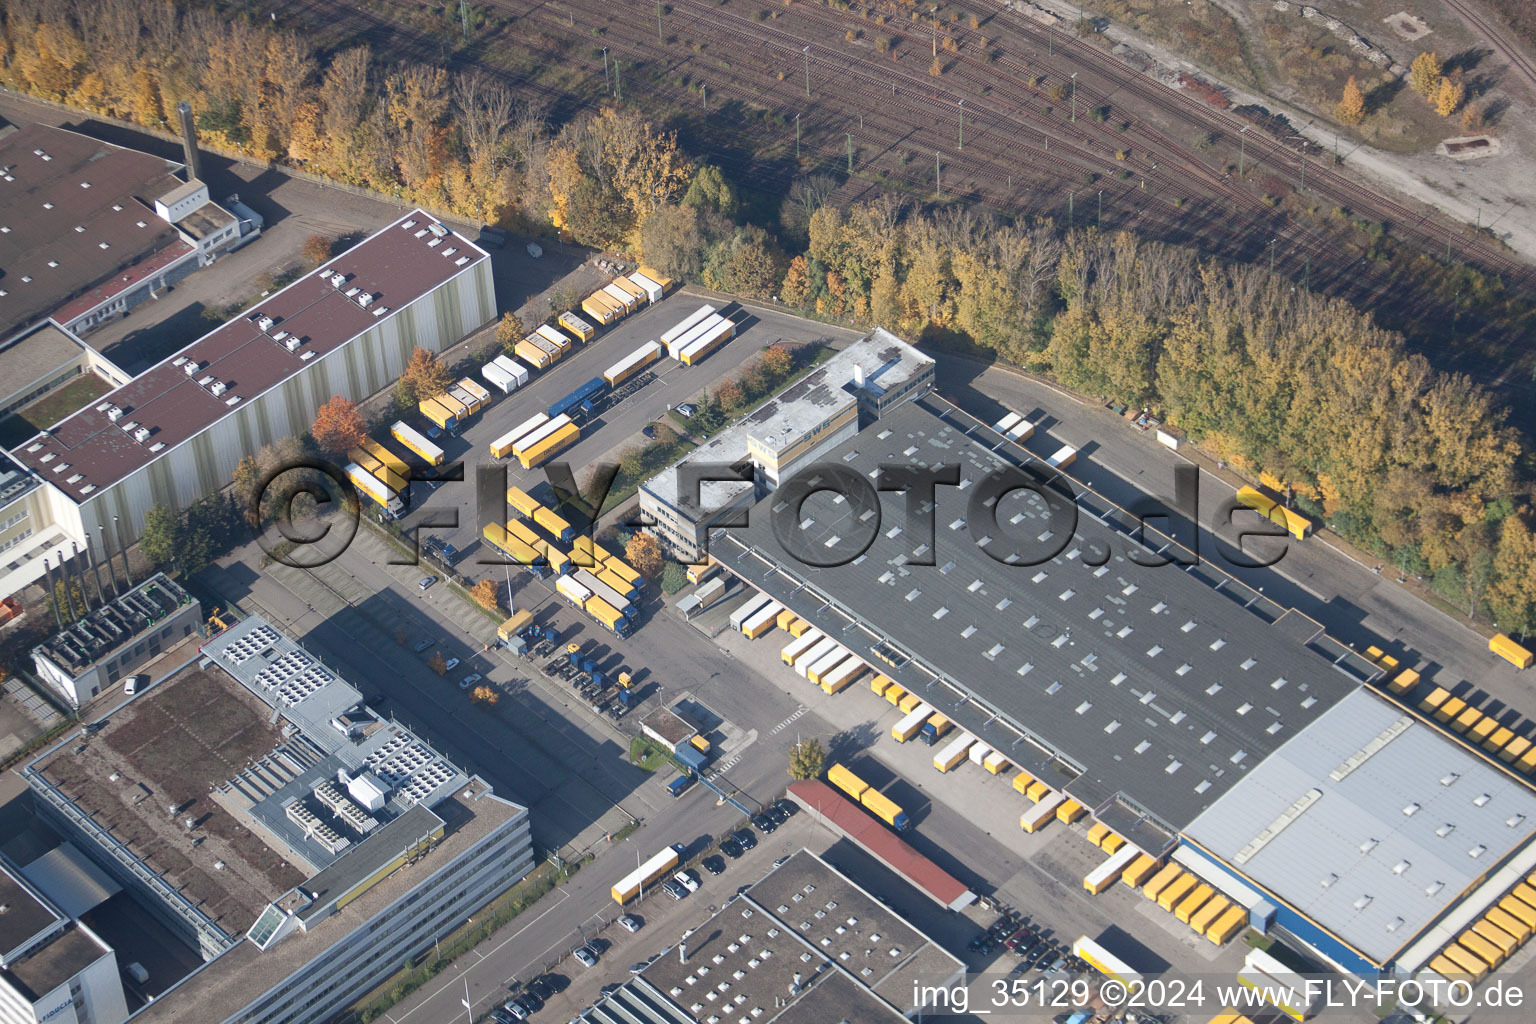 Warehouses and forwarding building SWS-Speditions-GmbH, Otto-street in the district Durlach in Karlsruhe in the state Baden-Wurttemberg from above